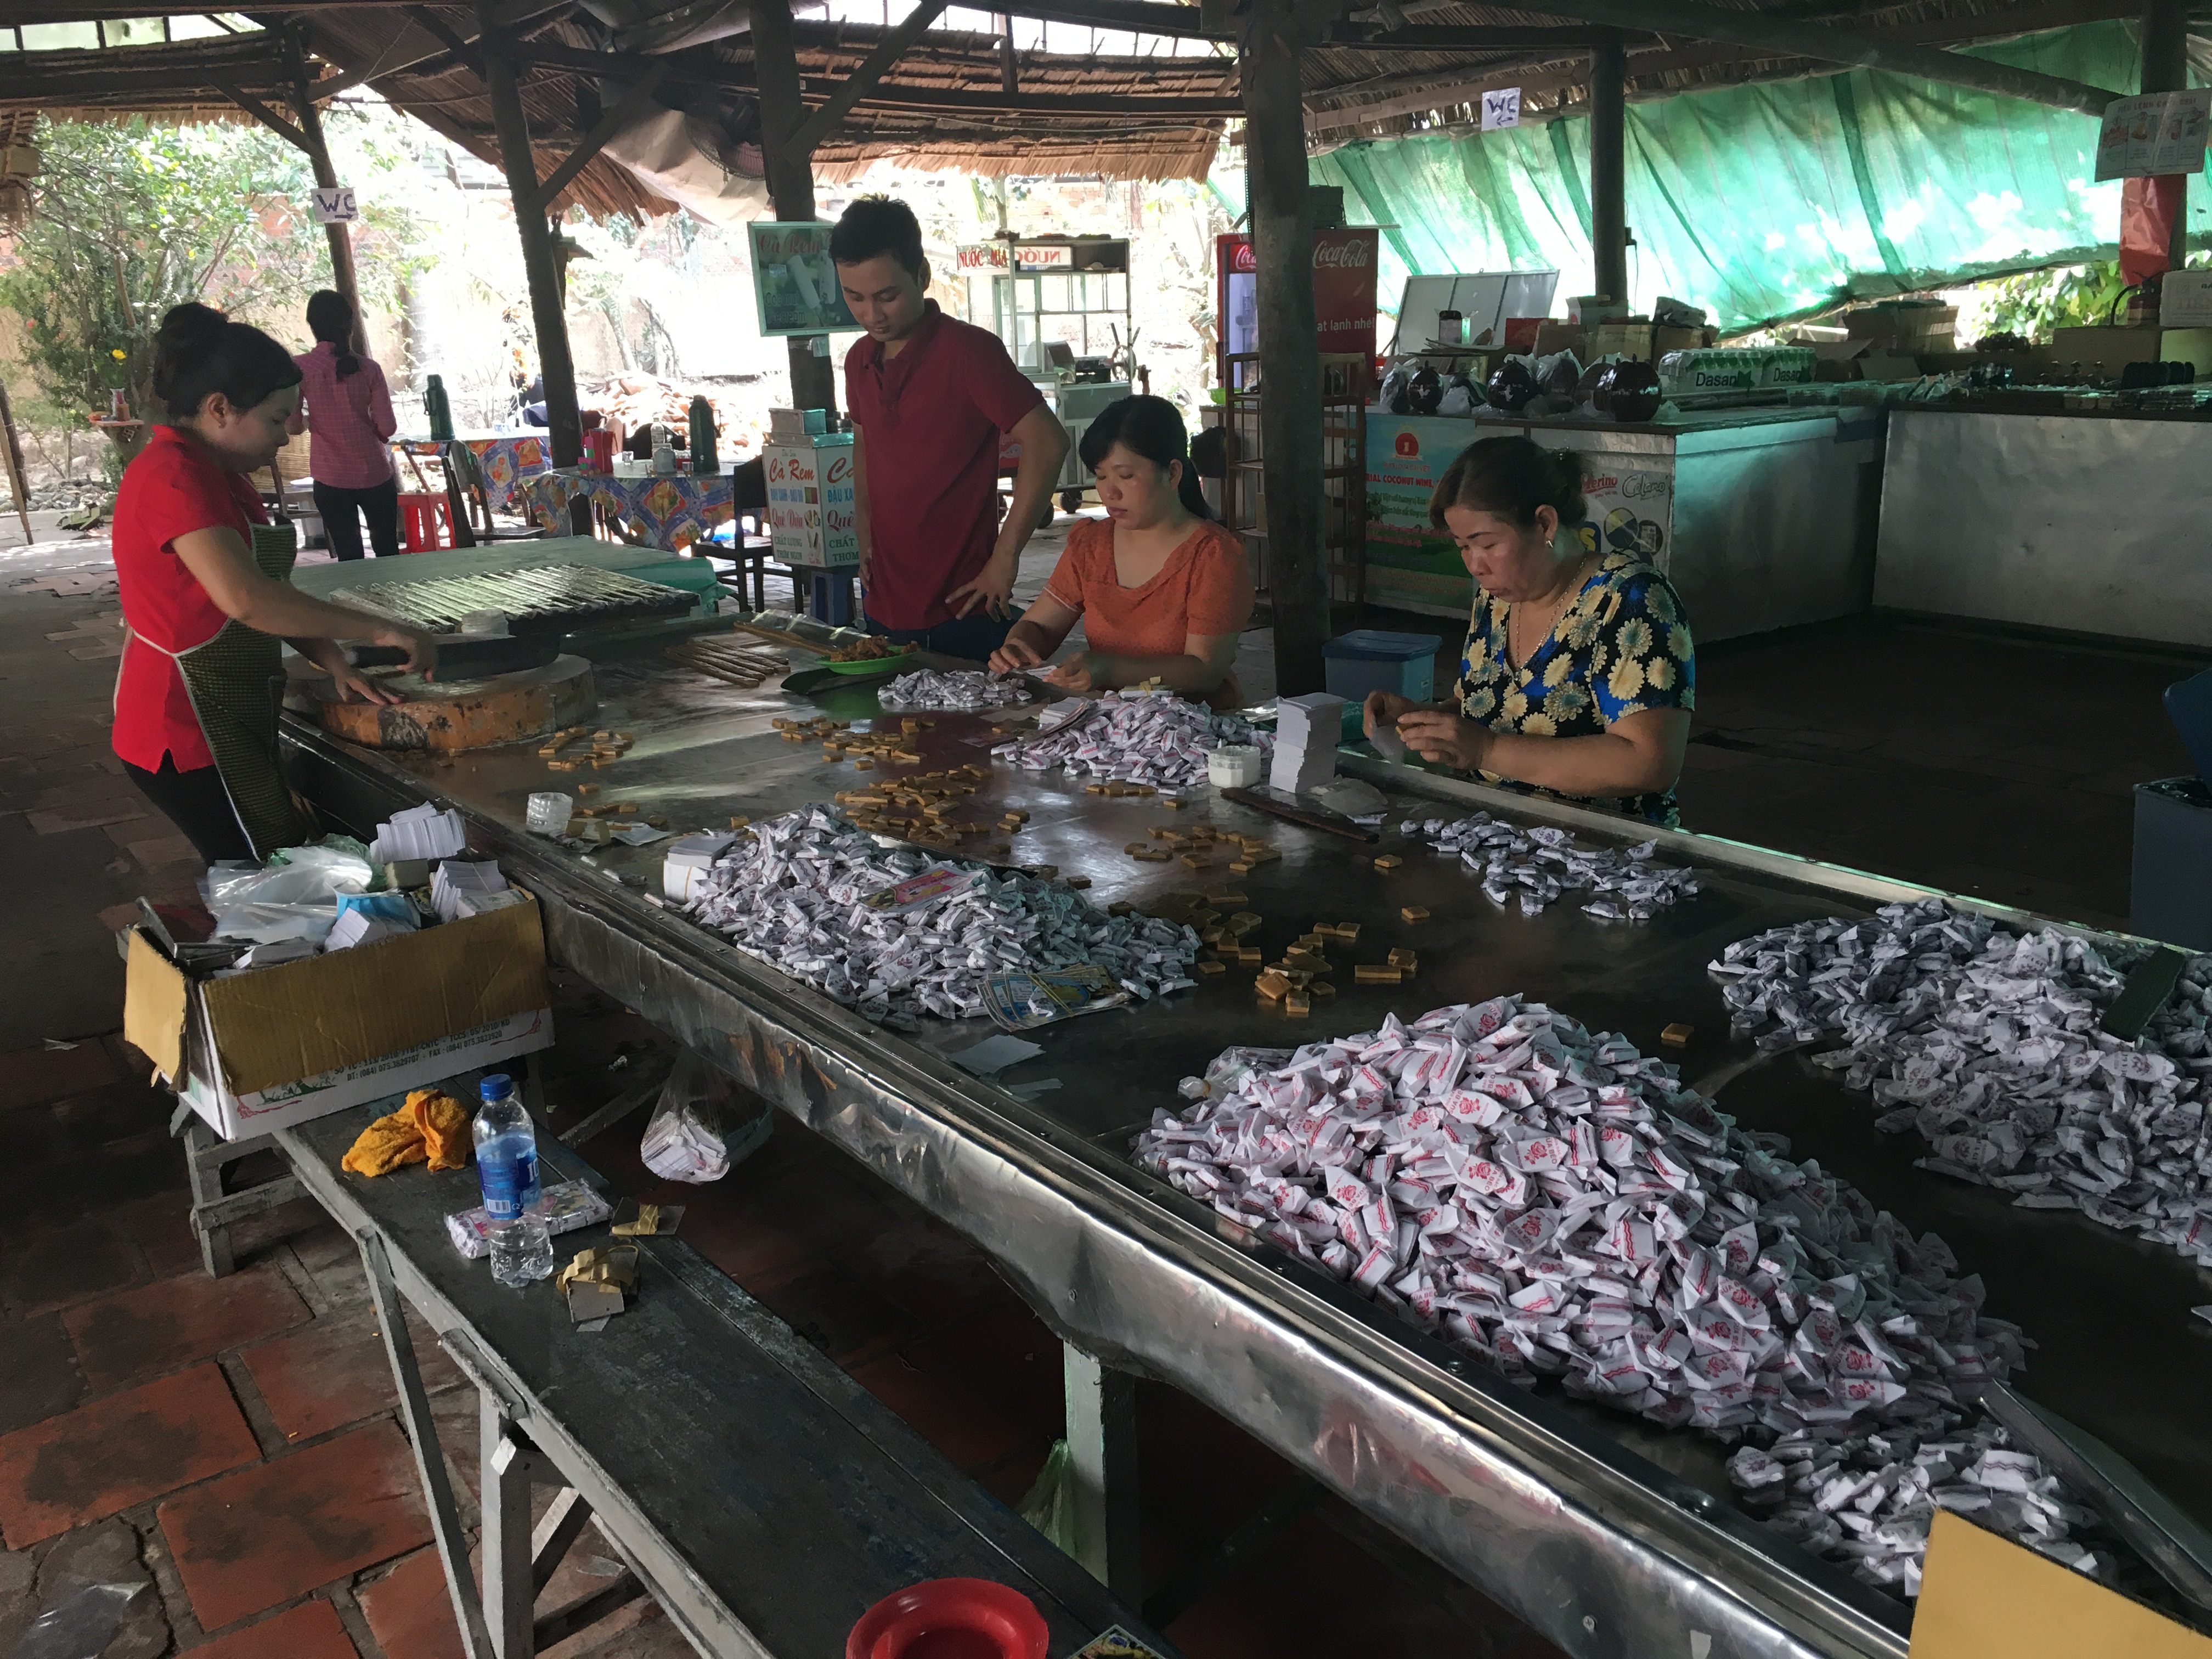 Local Vietnamese people making candy at the Mekong Delta.